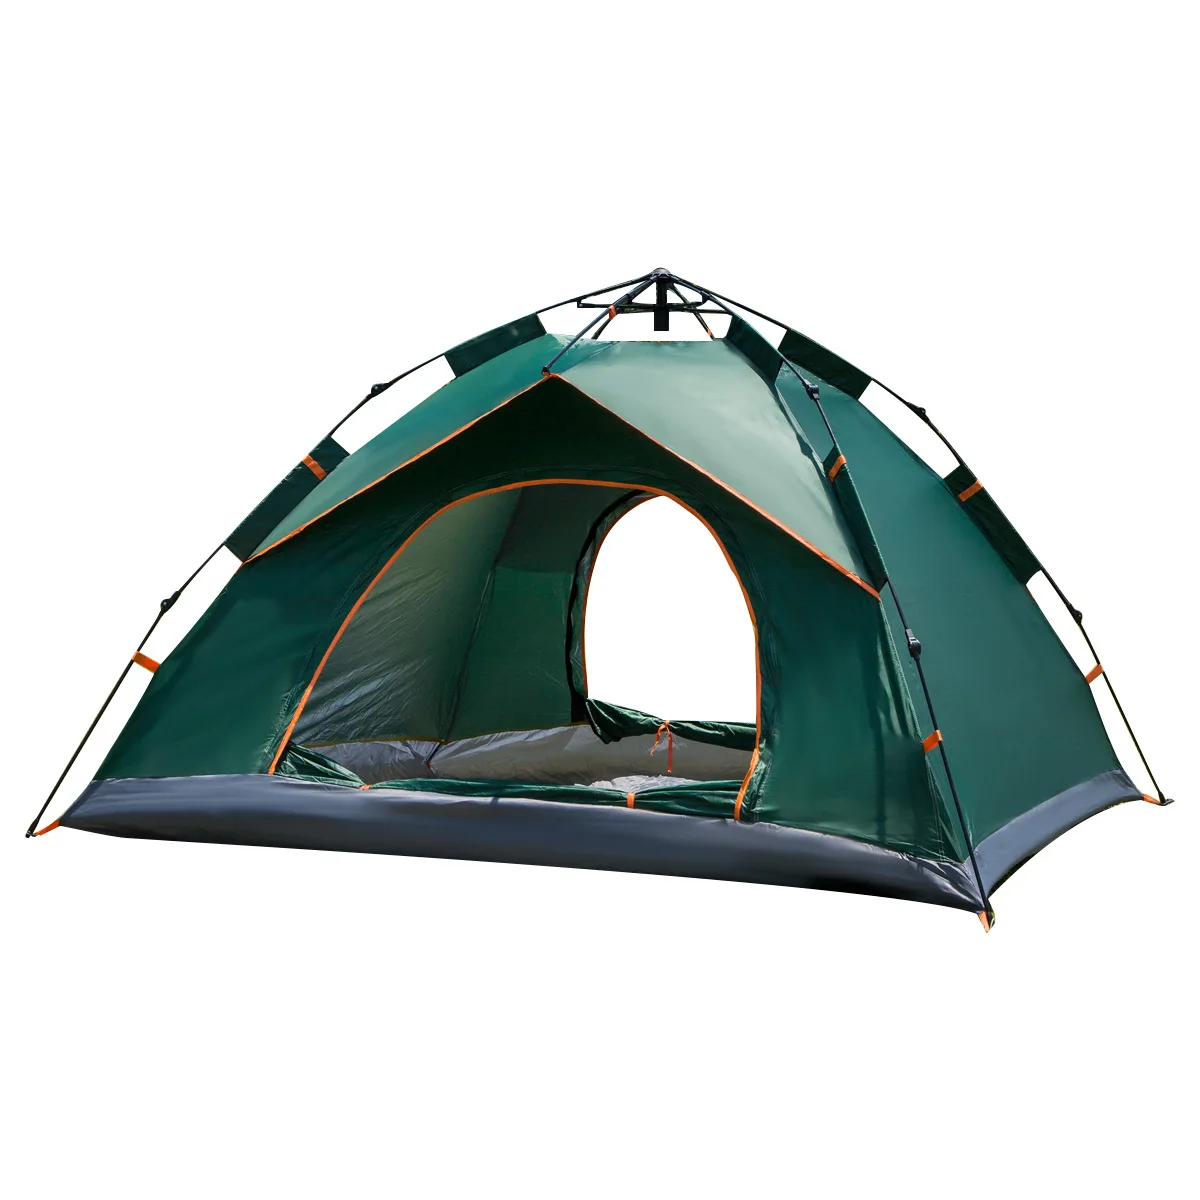 Fully Automatic Outdoor Portable Folding Camping Equipment with Customizable Tents